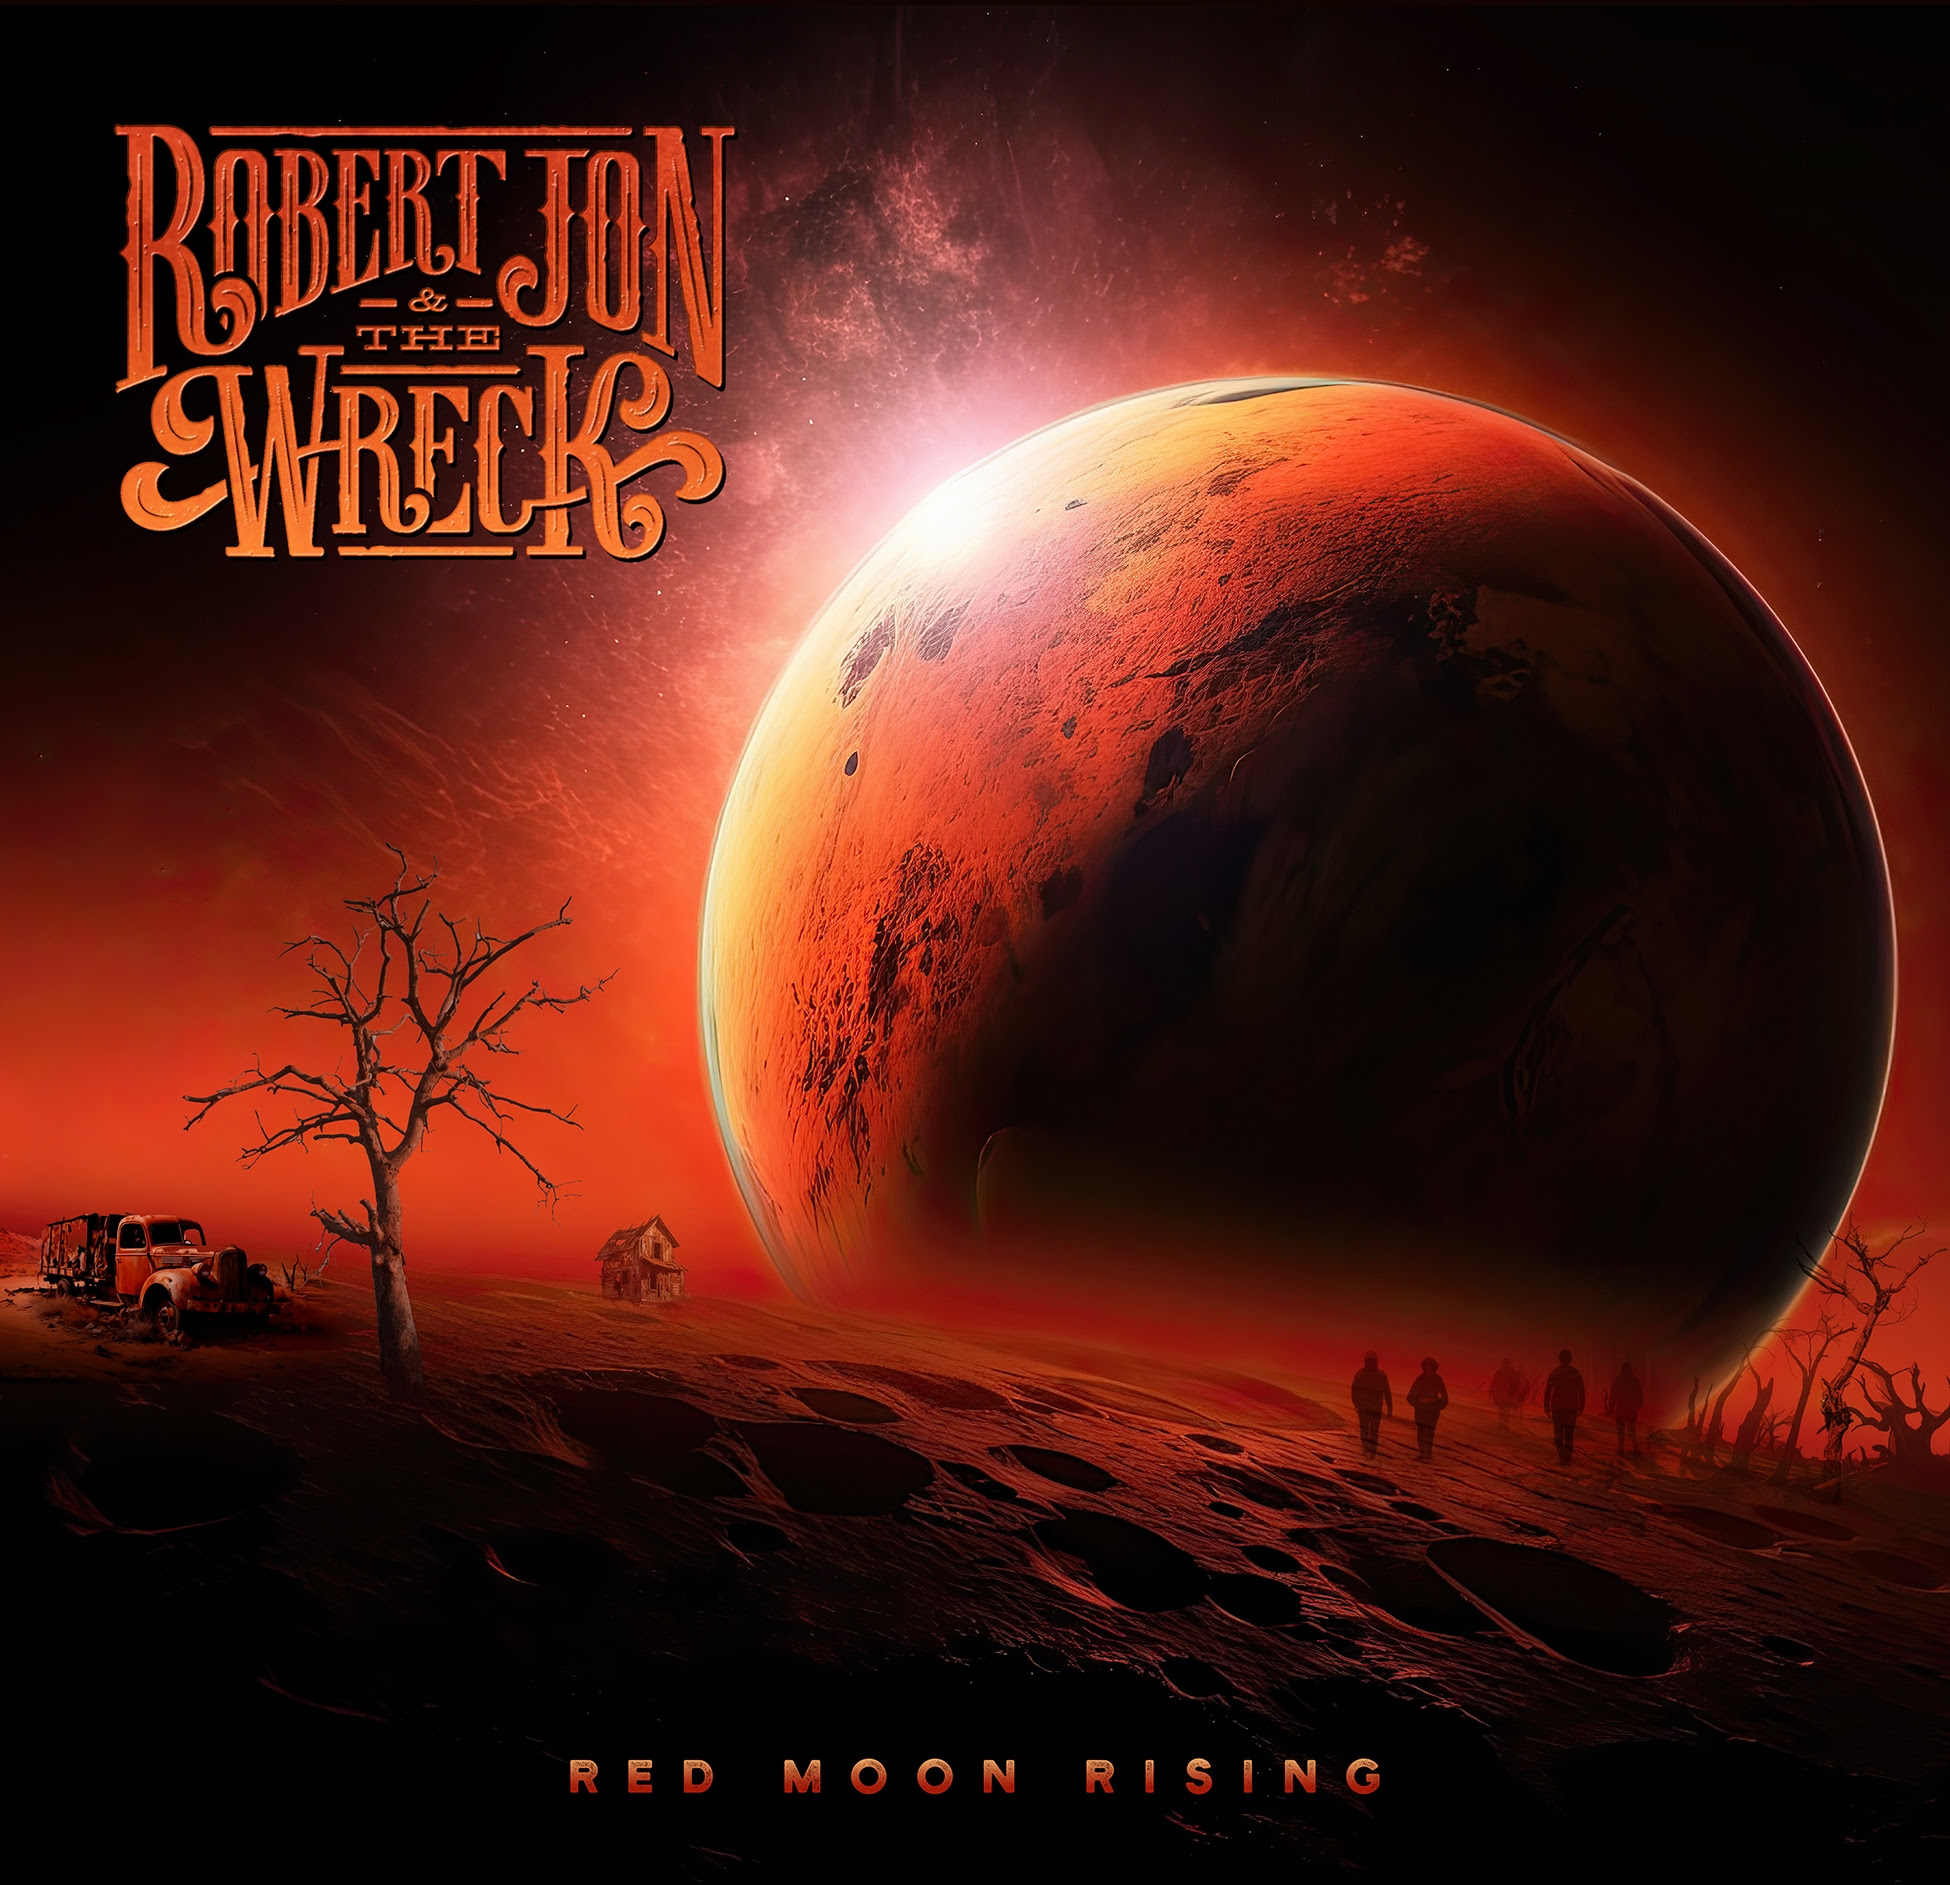 Robert Jon & The Wreck Release Highly Anticipated New Album "Red Moon Rising" Out Today